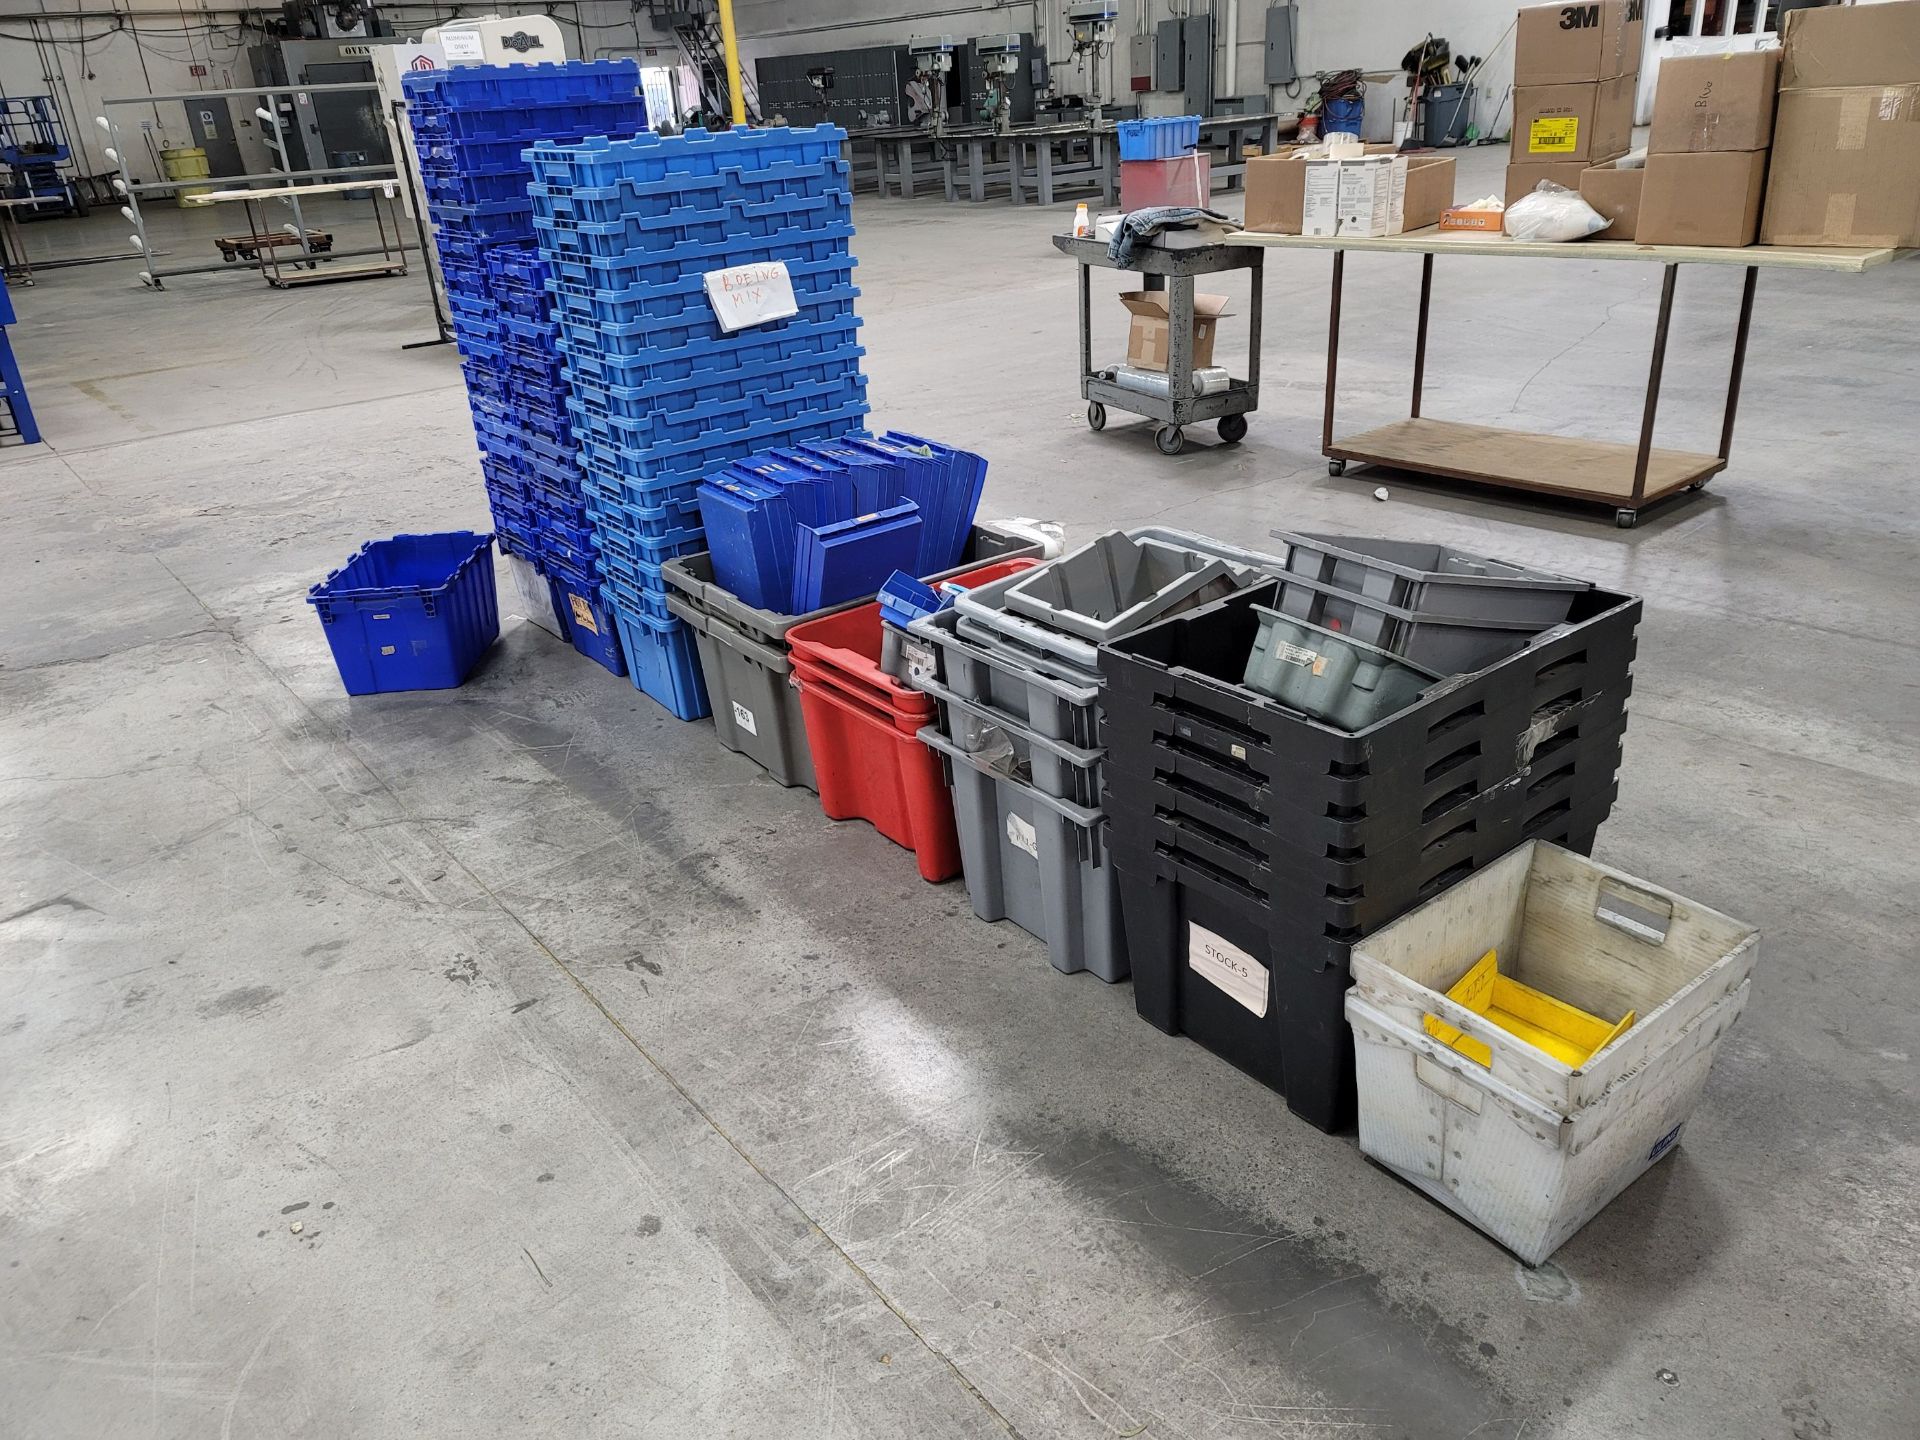 LOT - STACKABLE PLASTIC TUBS/BINS, VARIOUS SIZES, TRASH CANS, STEP STOOLS, ETC. - Image 2 of 3